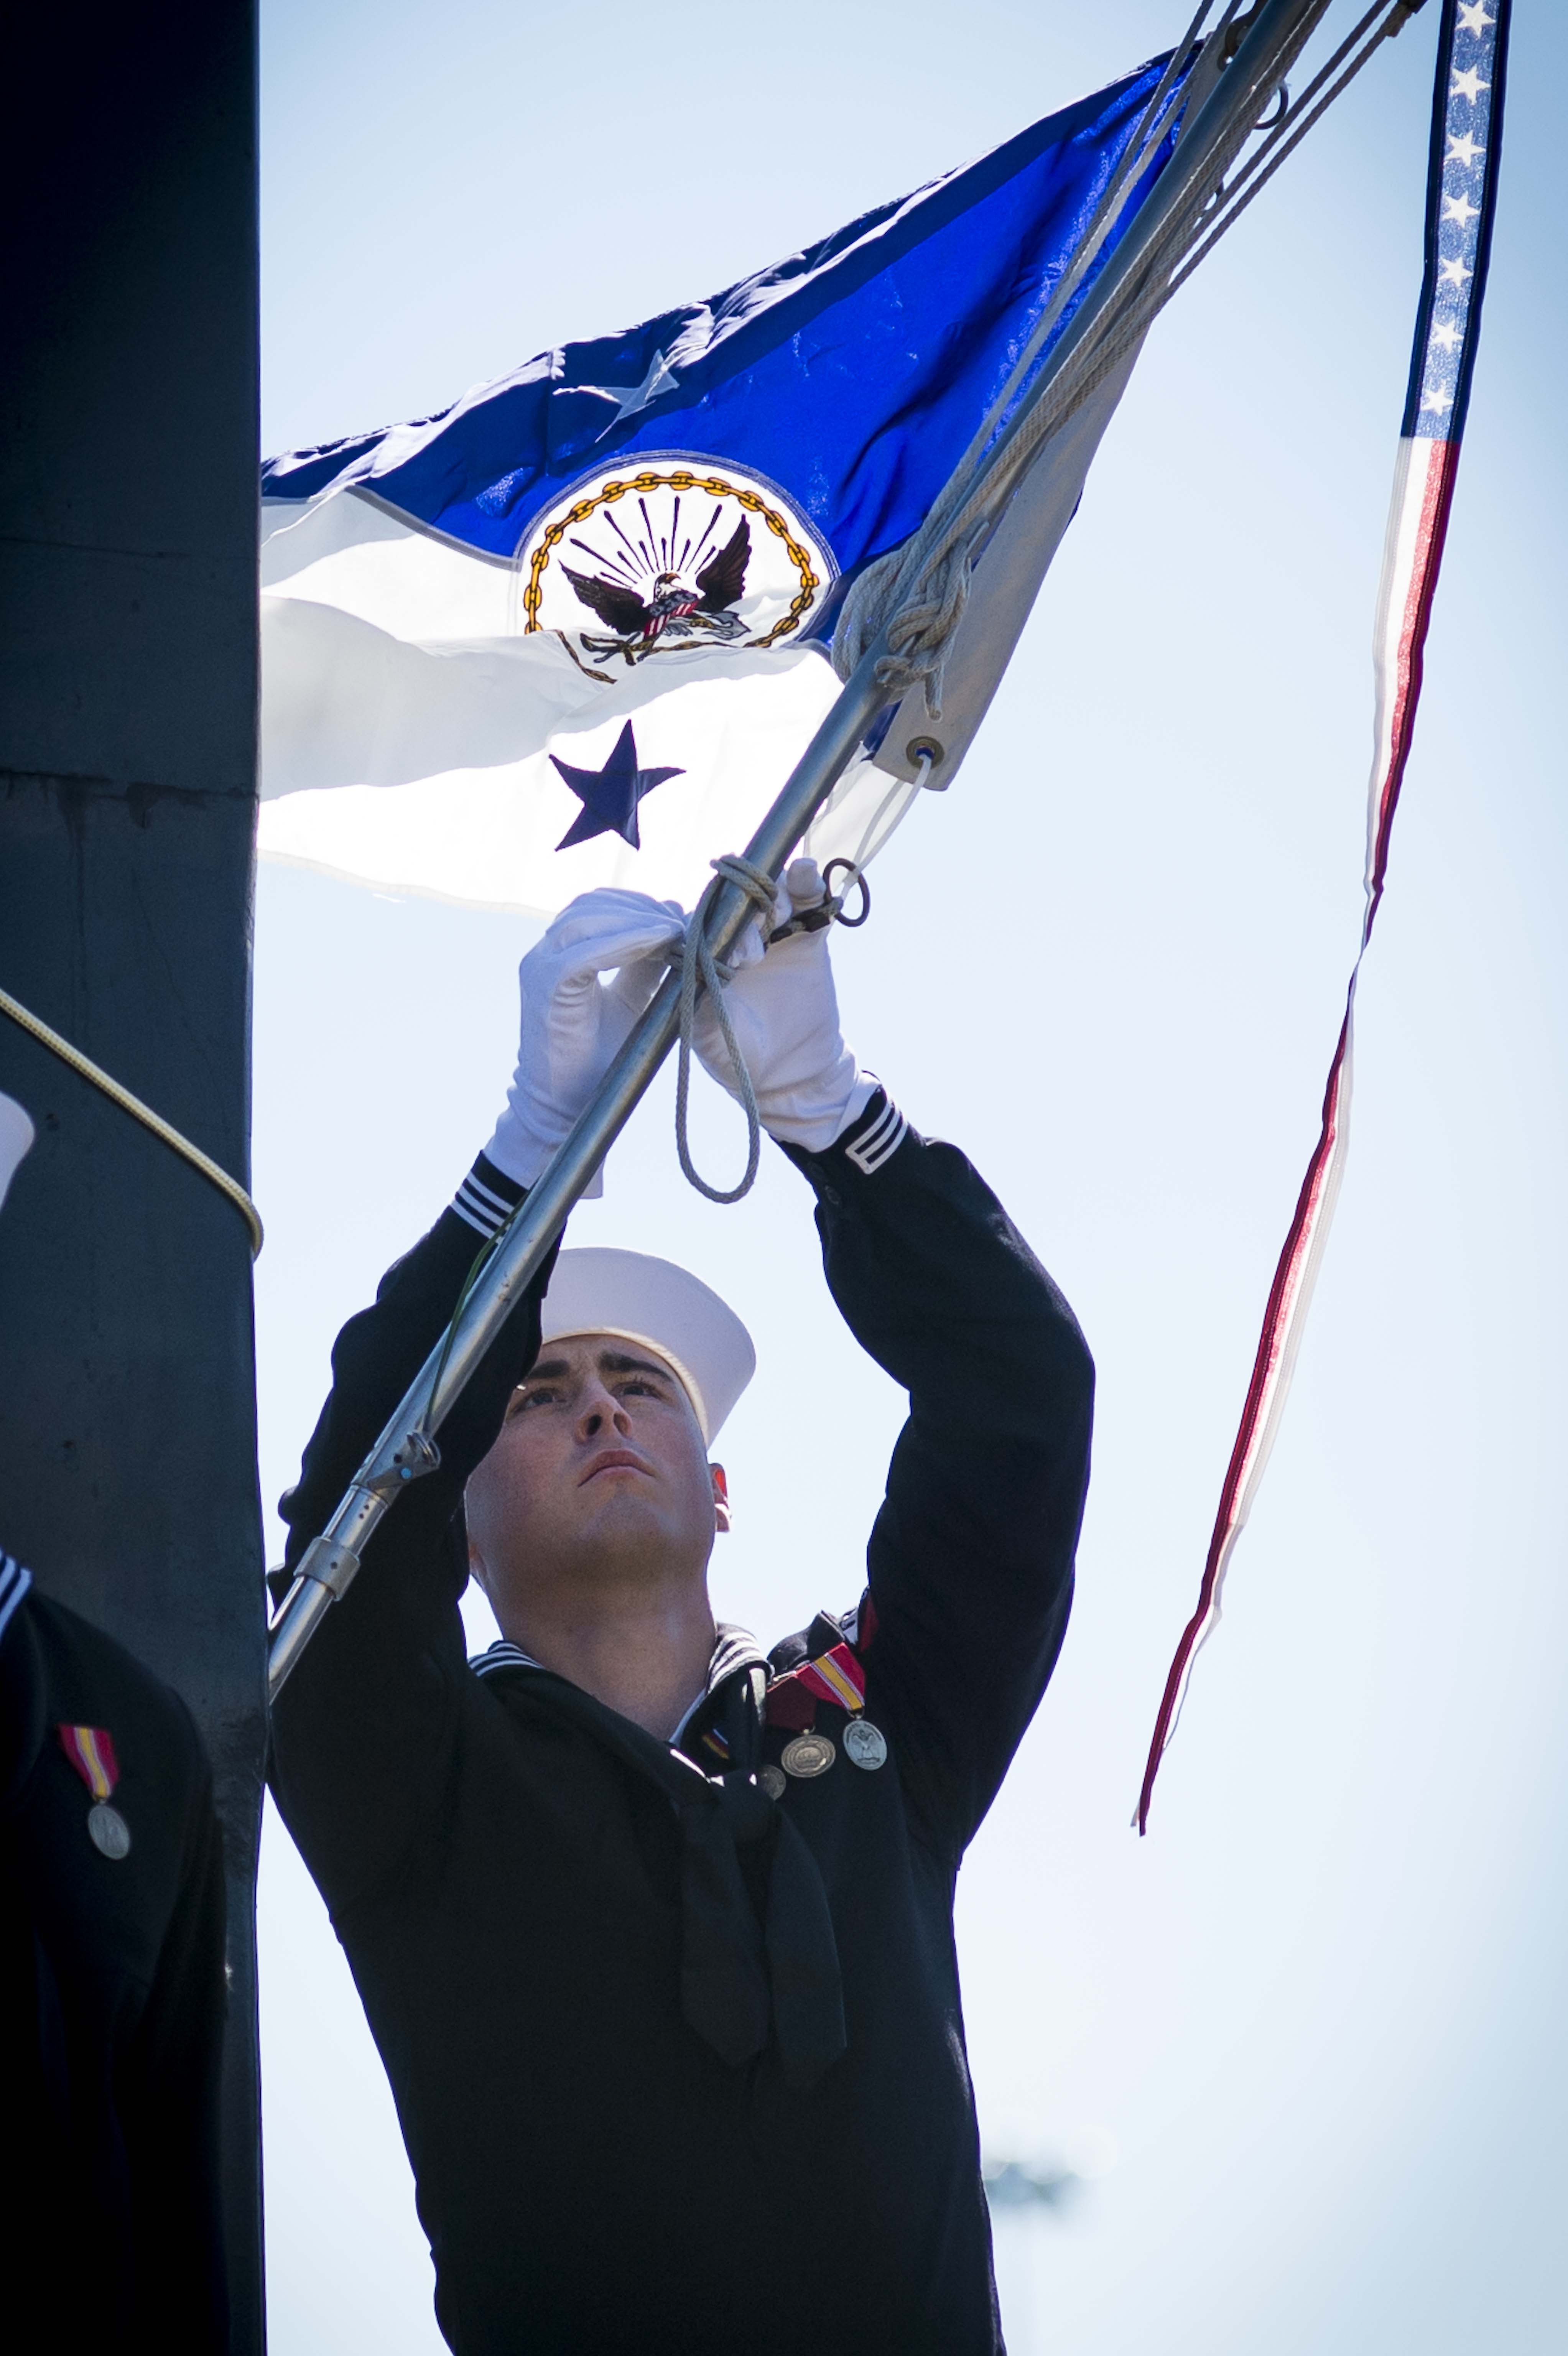 A quartermaster raises the Chief of Naval Operations (CNO) flag above the Virginia-class attack submarine USS North Dakota (SSN-784) on Oct. 25, 2014. US Navy Photo